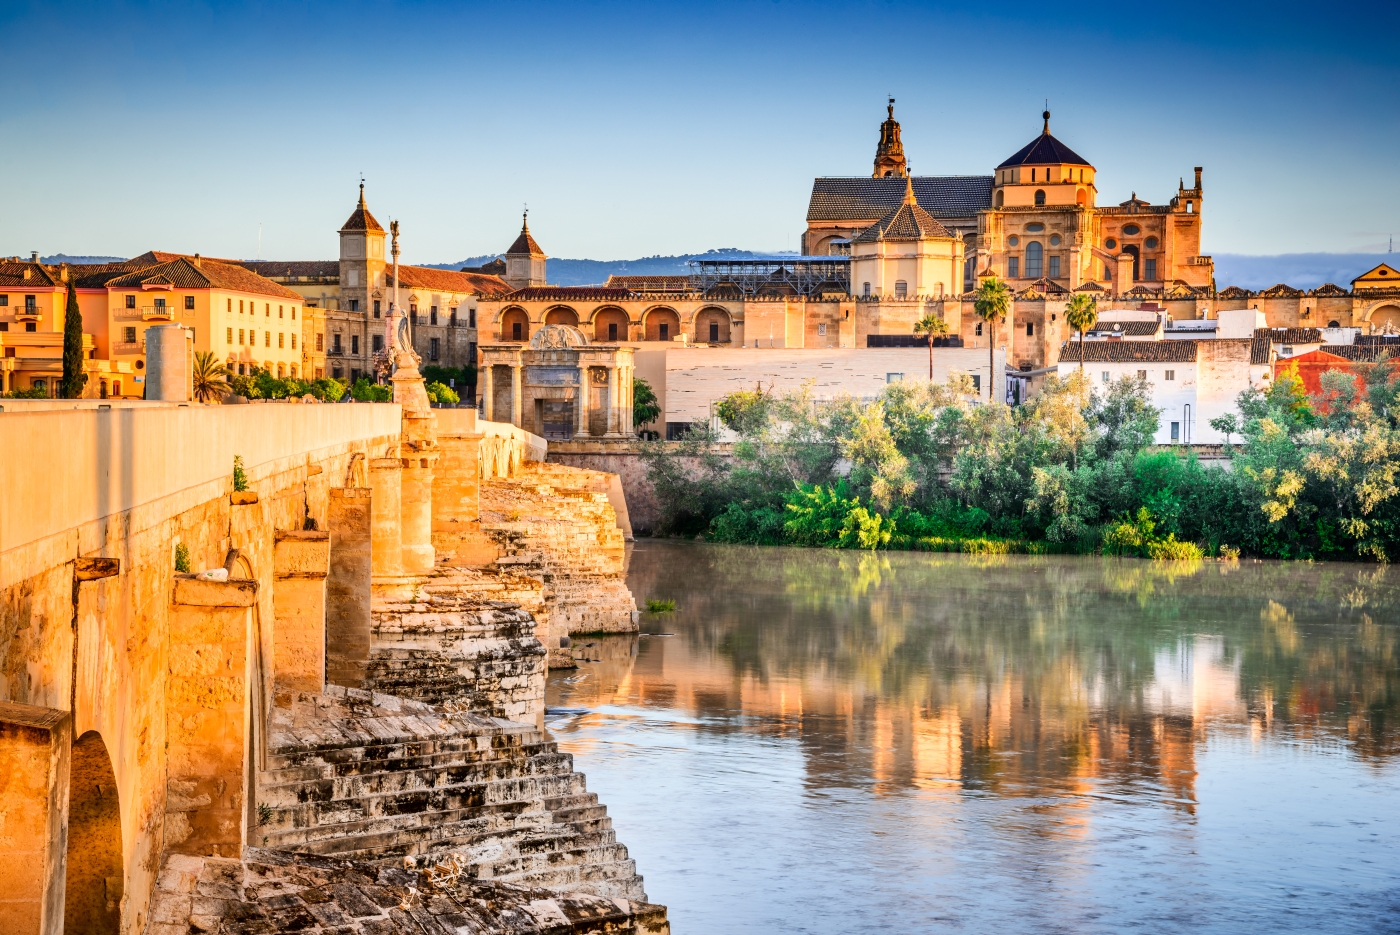 Roman bridge and great Mosque over water in Cordoba Spain